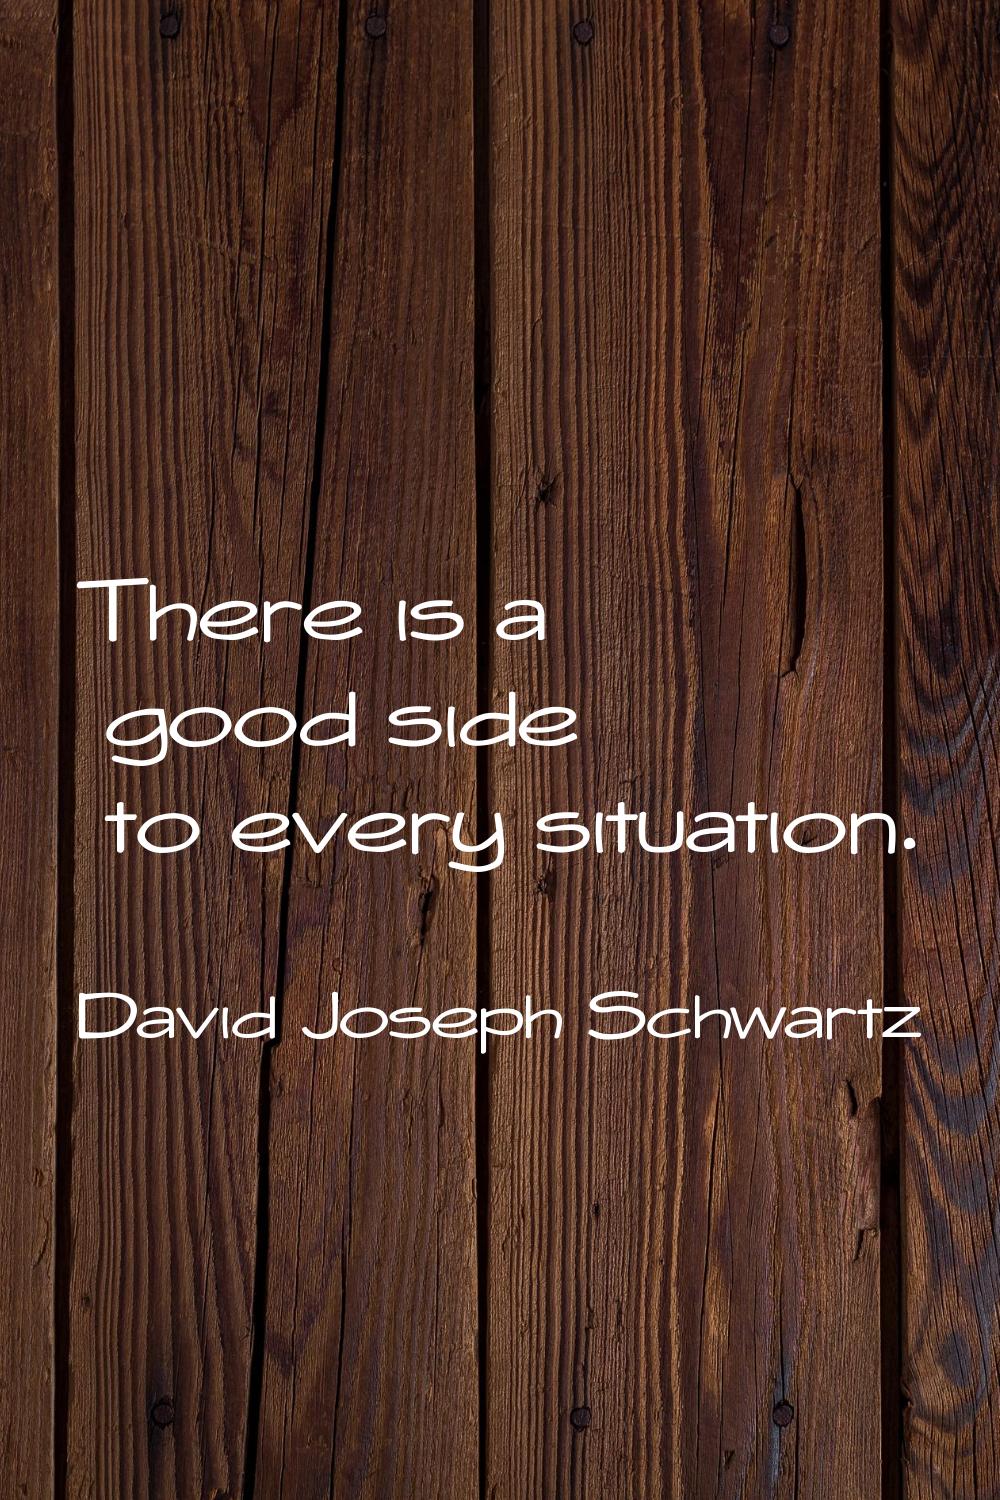 There is a good side to every situation.